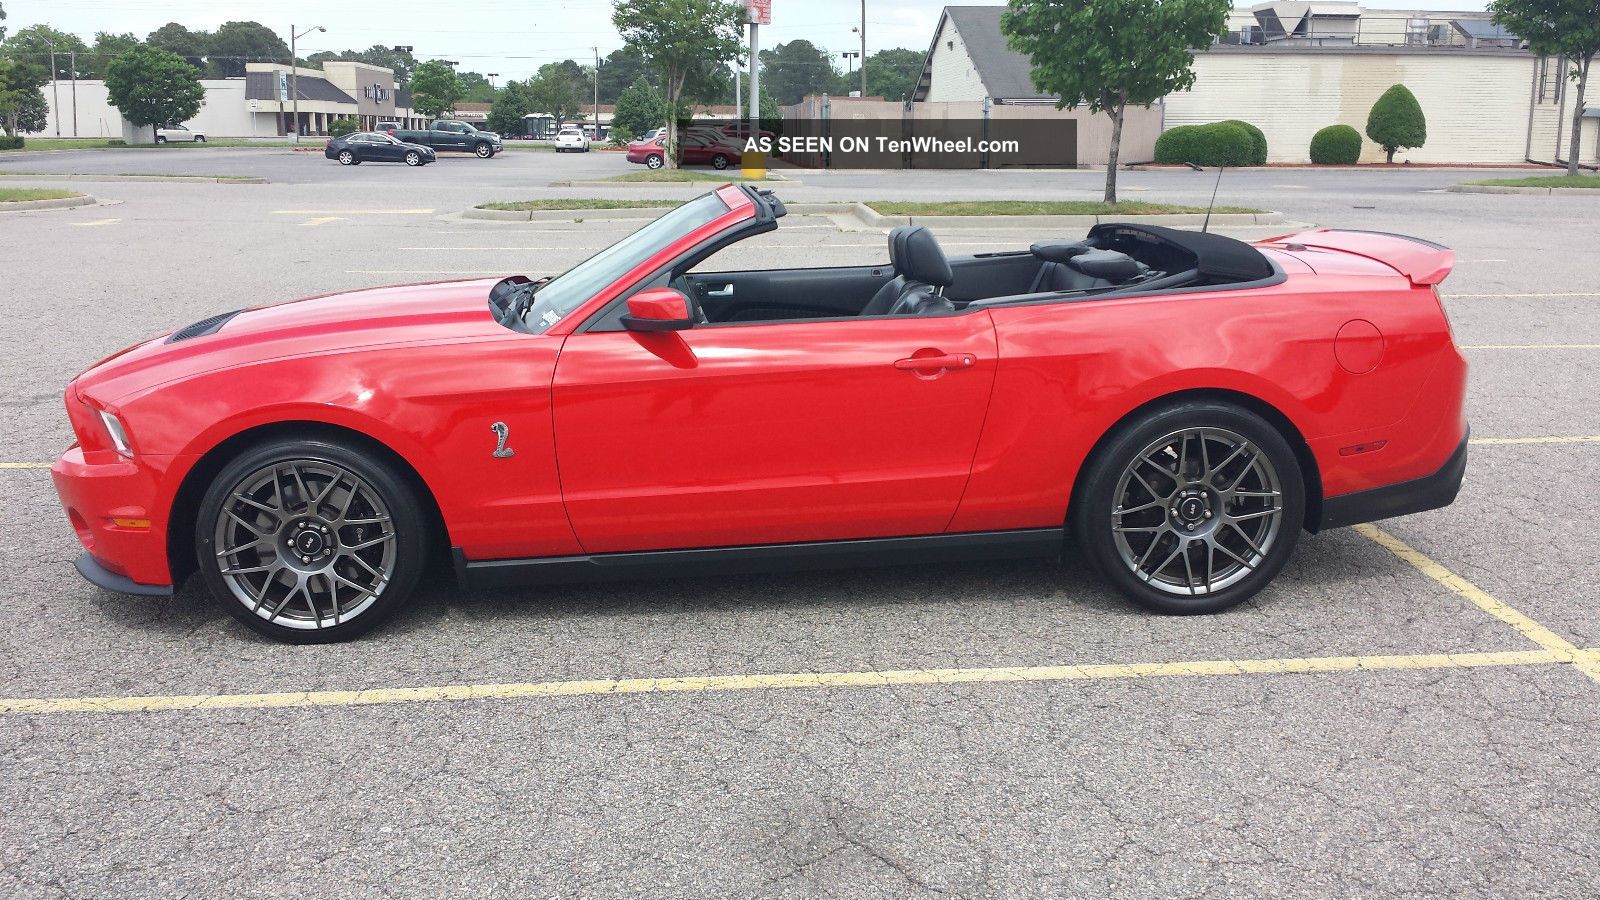 2012 Ford mustang shelby convertible #1